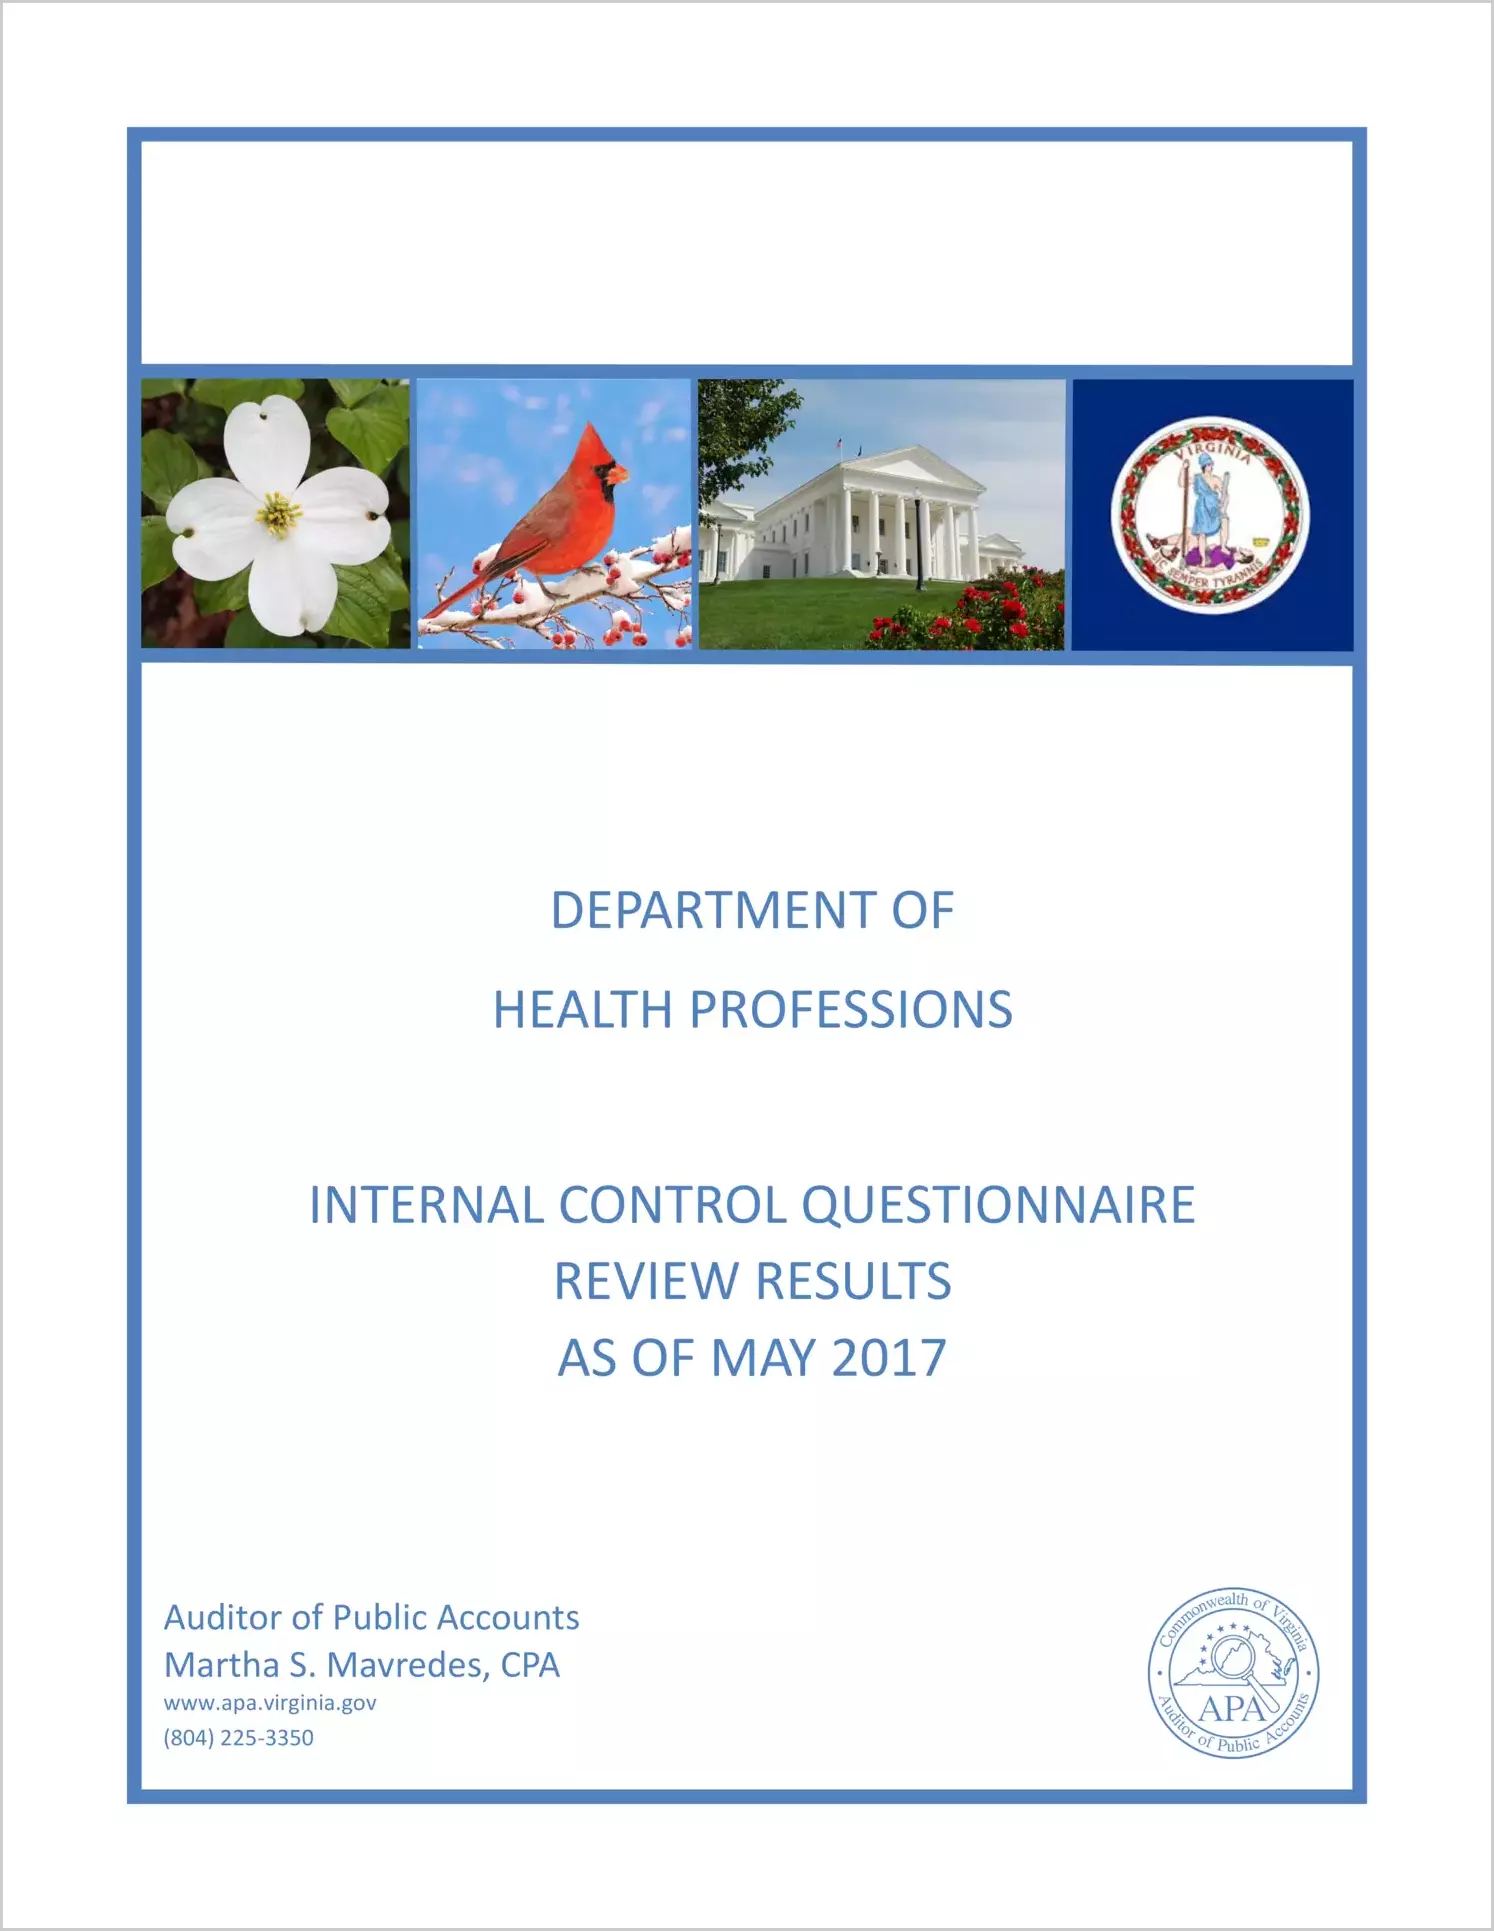 Department of Health Professions Internal Control Questionnaire Review Results as of May 2017